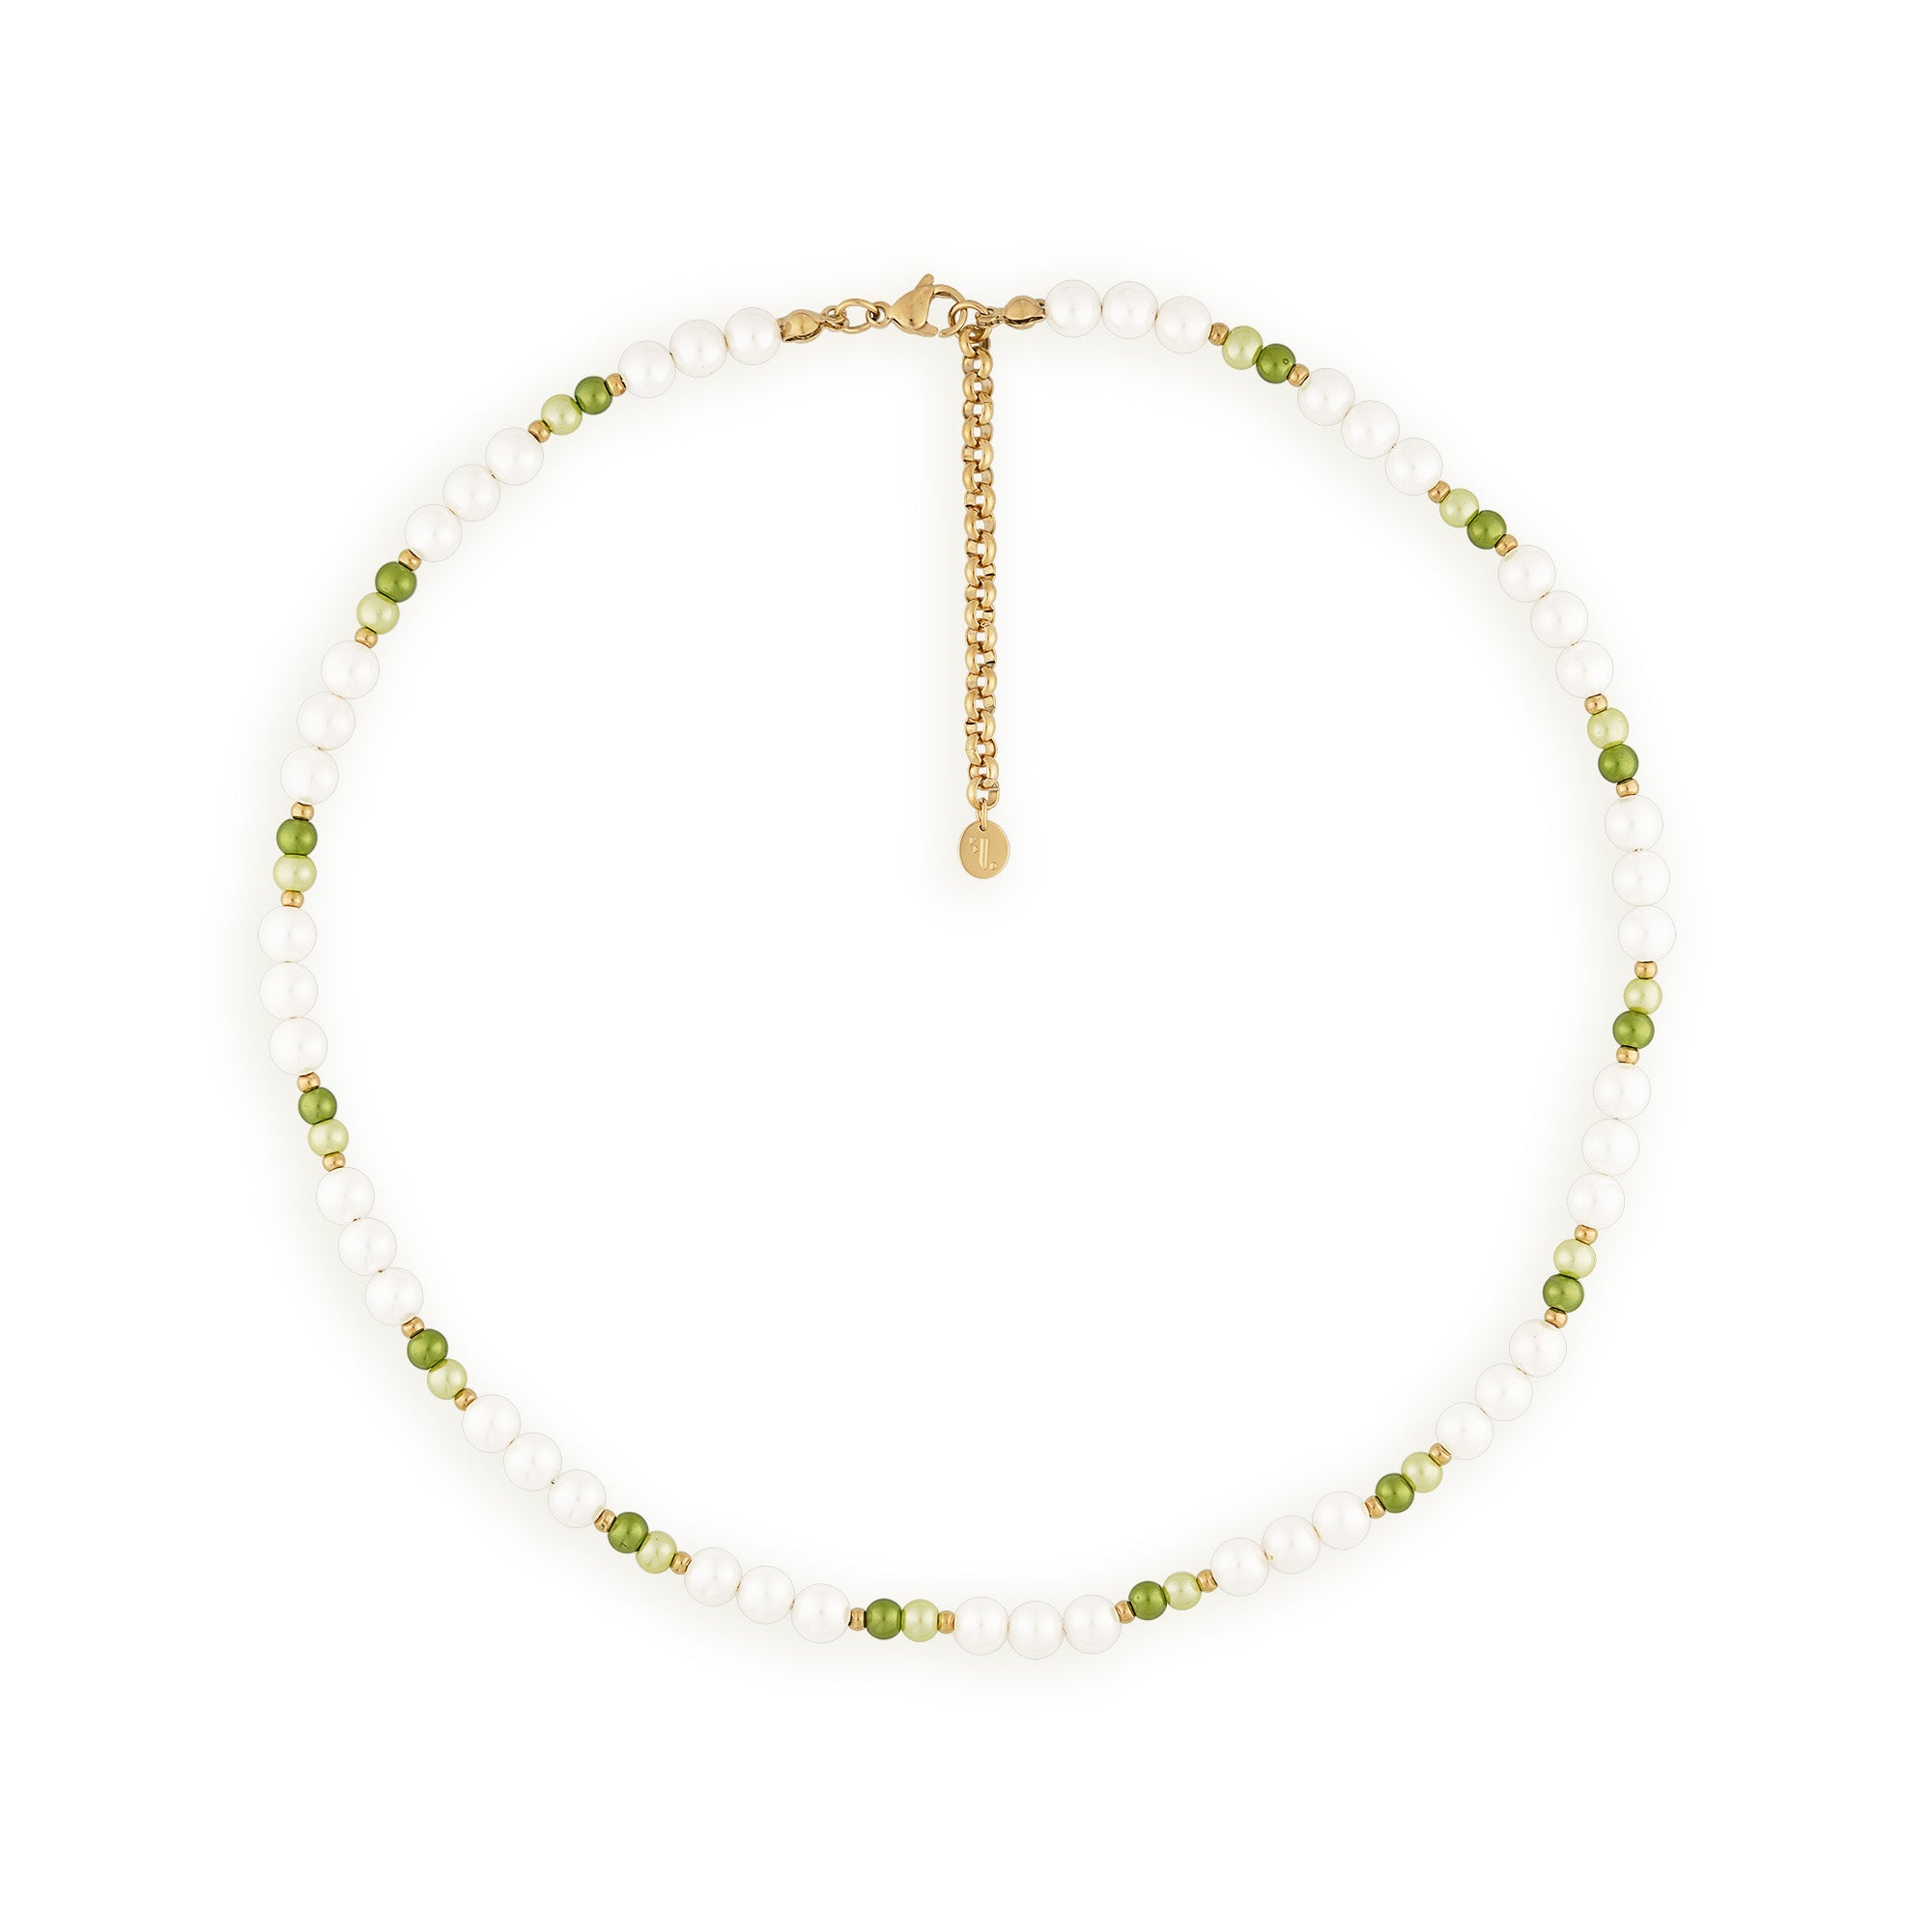 Five jewelry pearls necklace made with 2 shades of green glass beads and white pearls, crafted with natural shell. 45cm + 5cm extension, 14k gold rollo chain for adjustment. Fashion accessory, statement jewelry. Designed in Montreal, Canada.